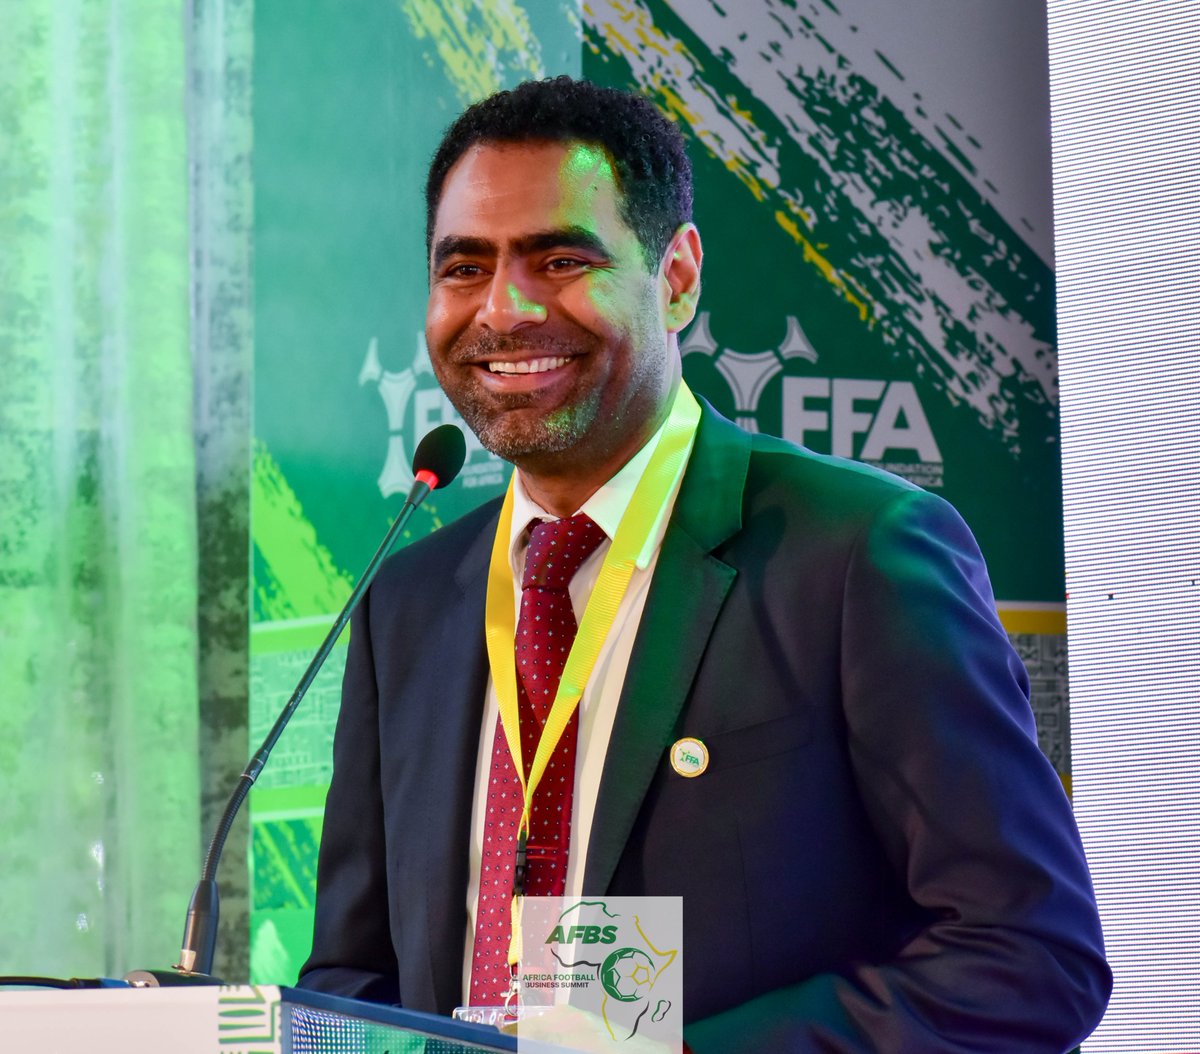 We were privileged to have Hussein Mohammed, the CEO of Extreme Sports, as the Guest Speaker at the Africa Football Business Summit.

#TransformingOurGame #FFA #AFBS #football #footballbusiness #Africa